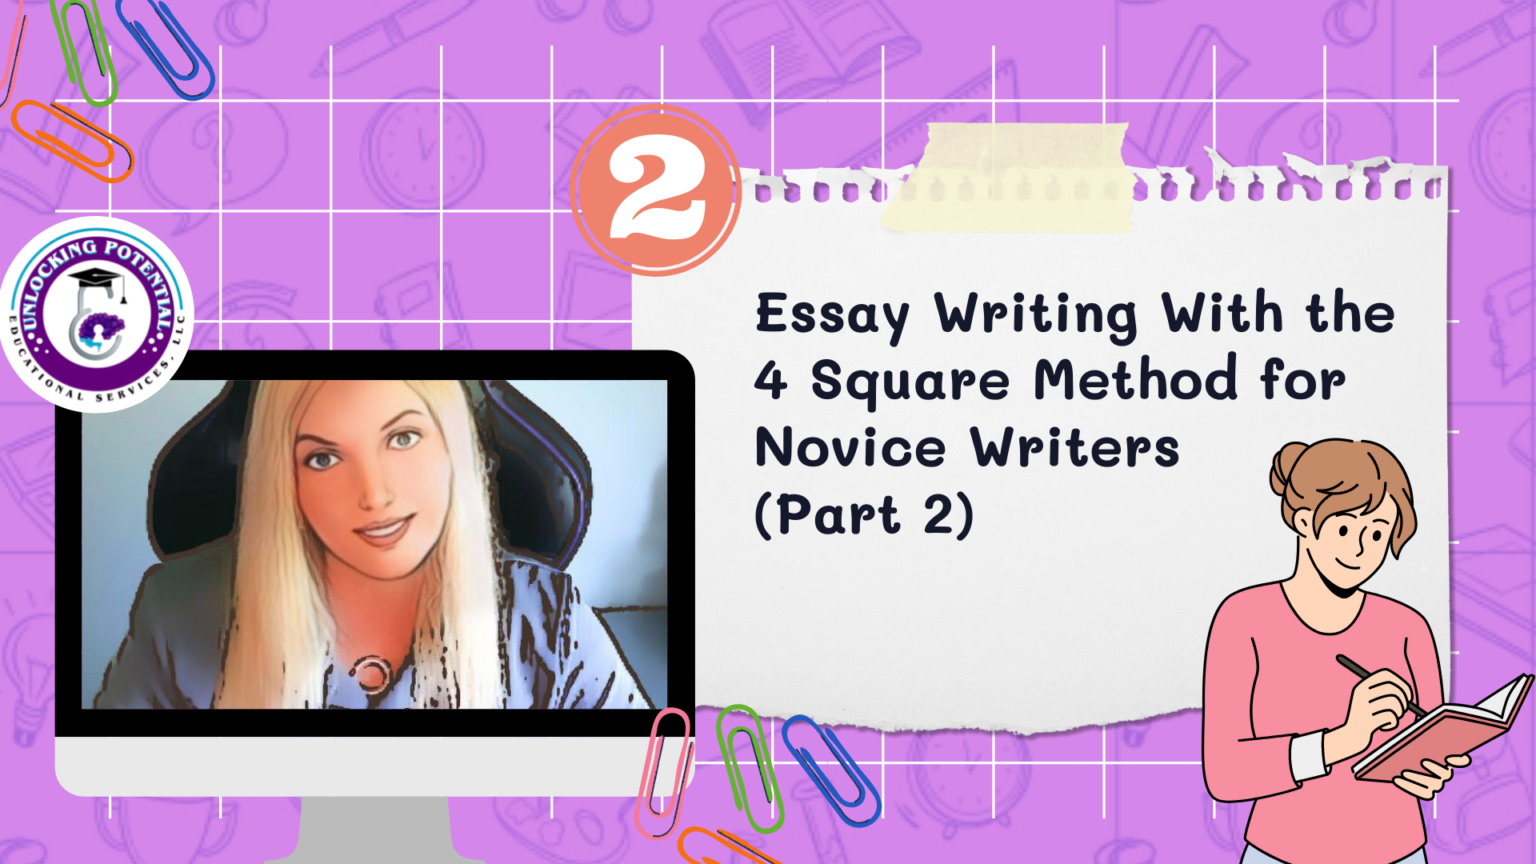 essay-writing-with-the-4-square-method-for-novice-writers-part-2